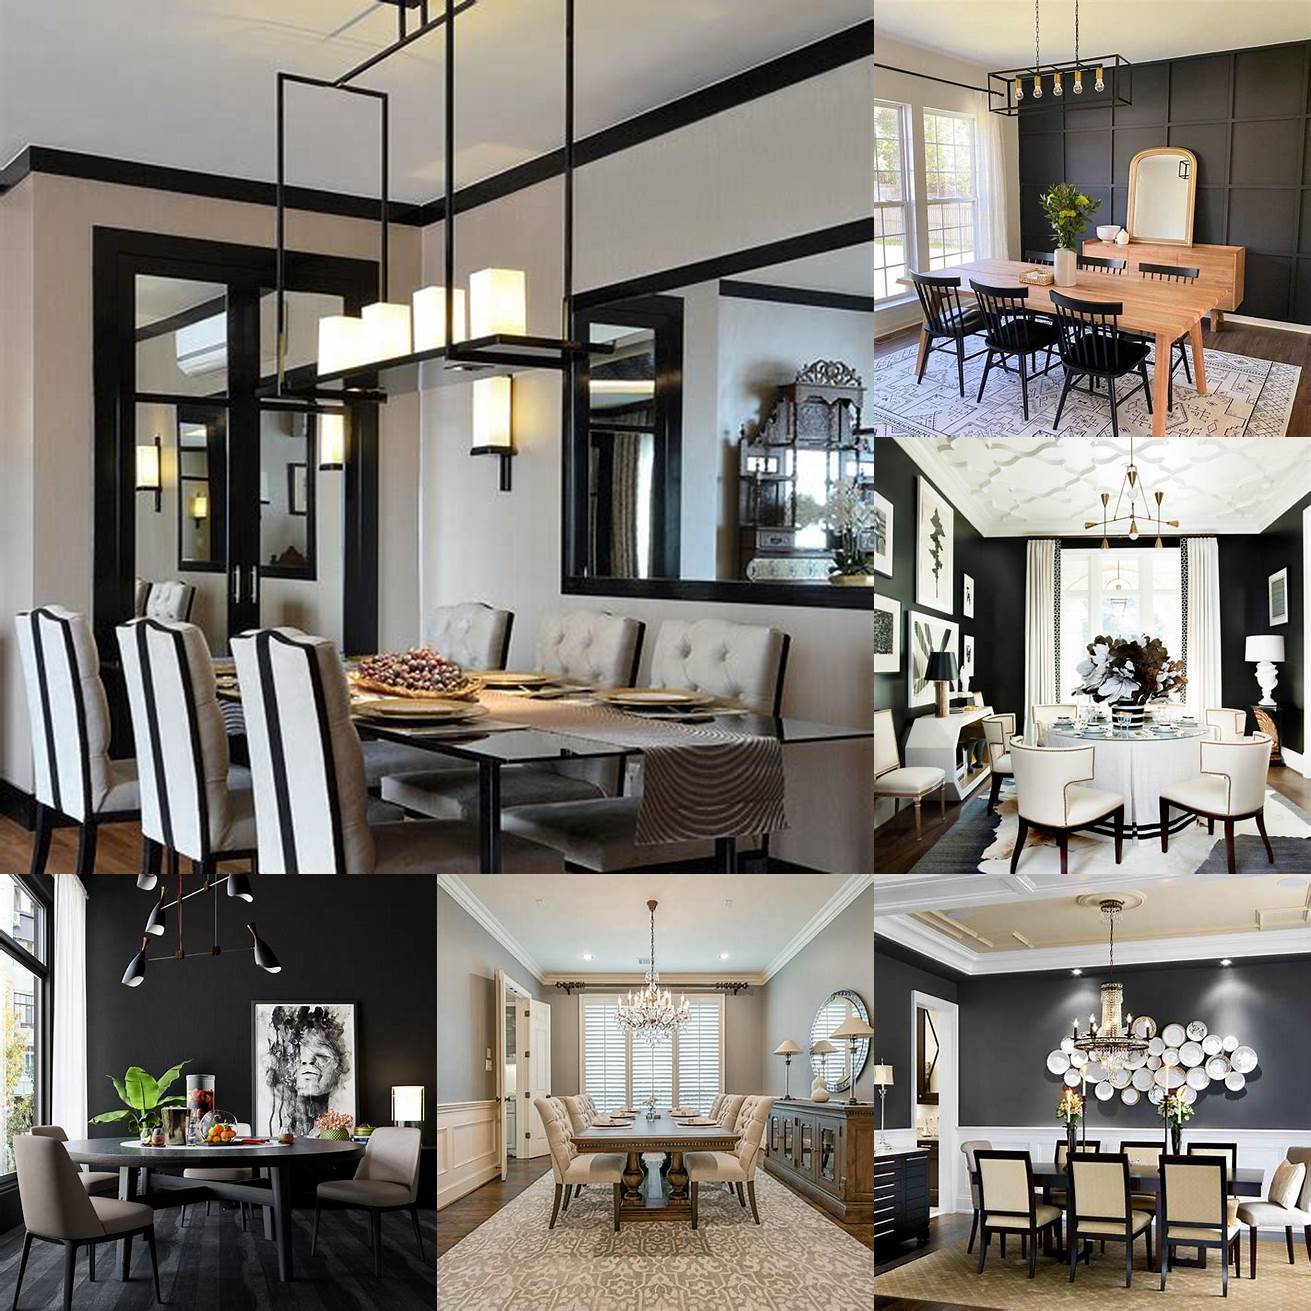 Beige dining room with black accents